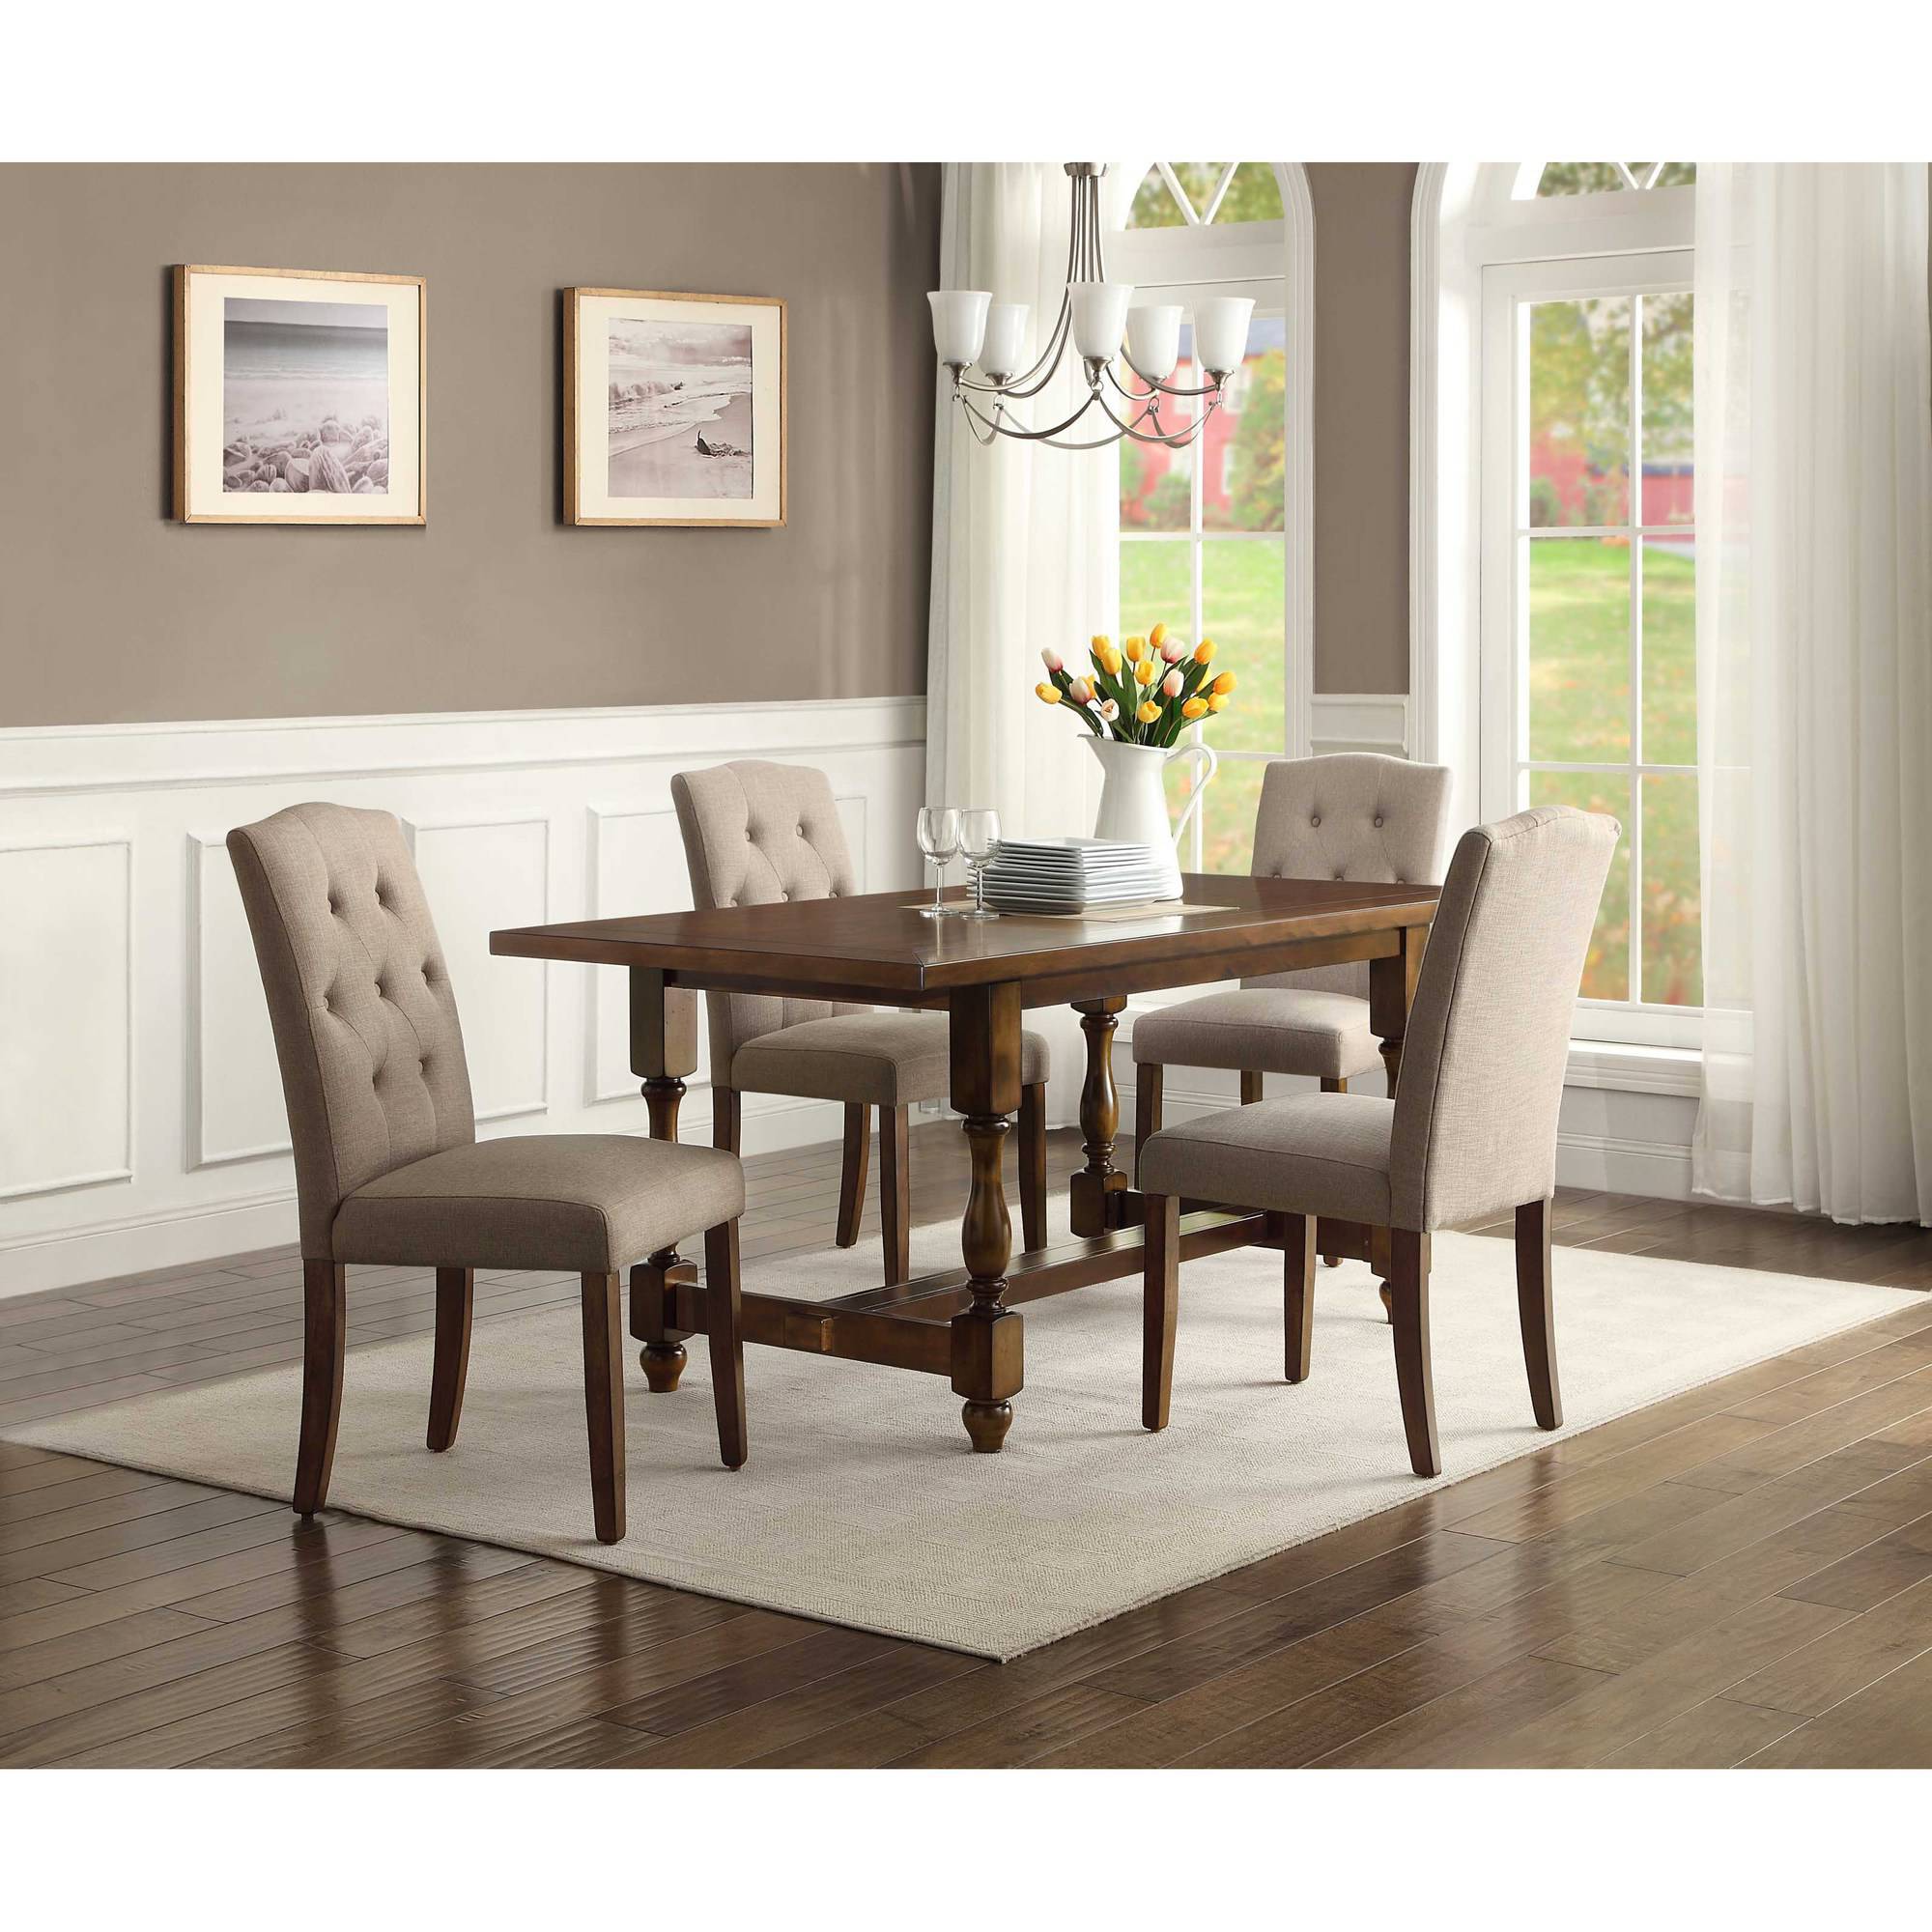 Better Homes & Gardens Providence 5-Piece Dining Set, Brown - image 1 of 7